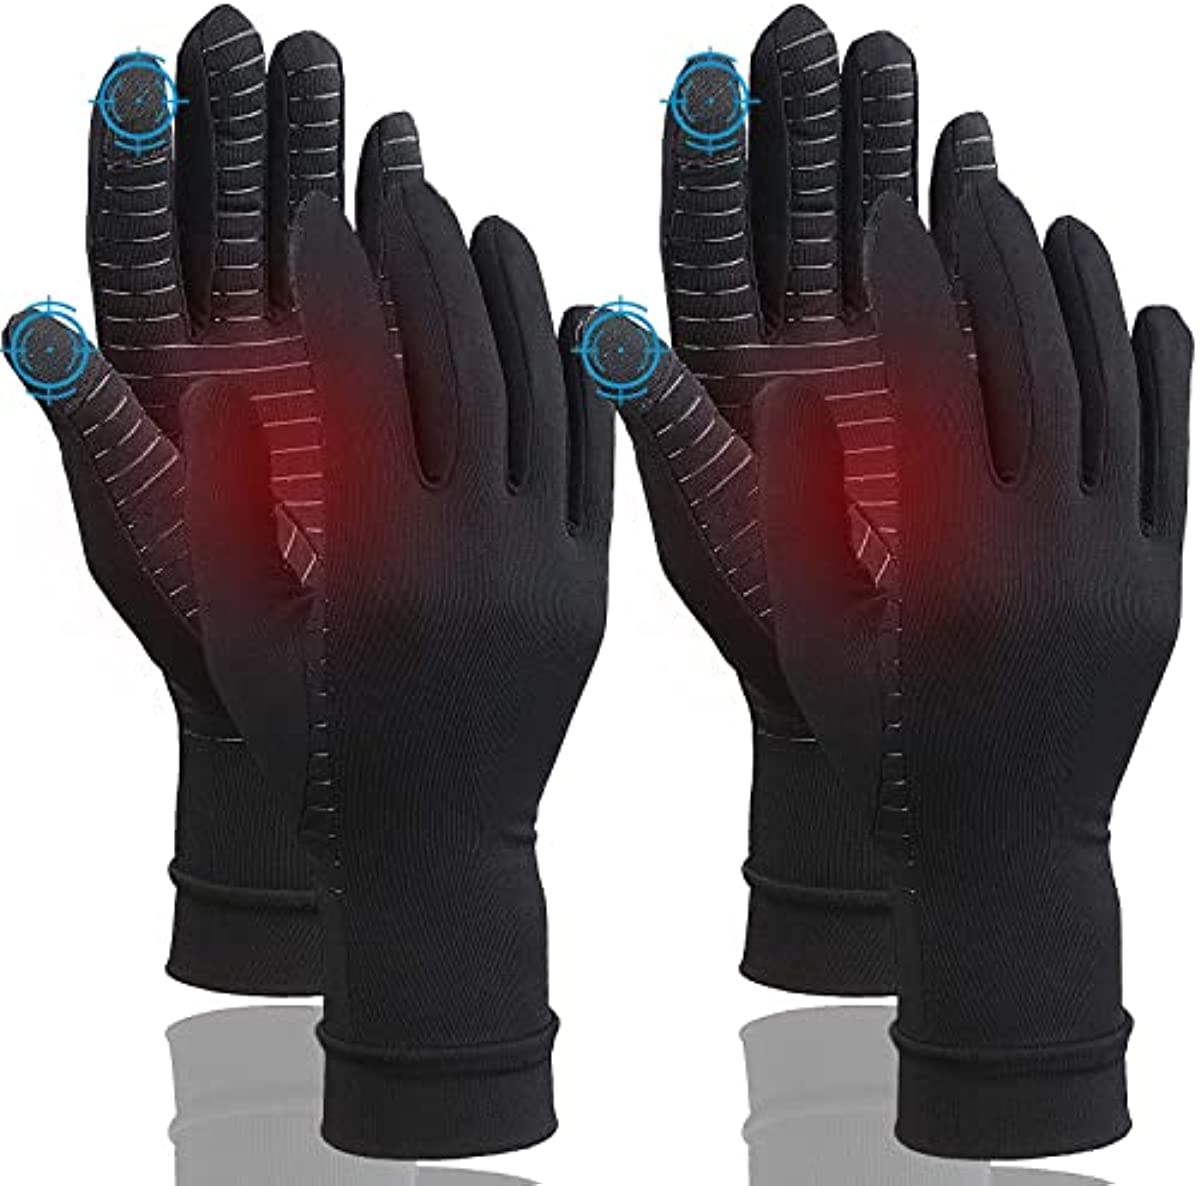 2 Pairs Pack Full Finger Compression Gloves for Women Men, Copper Arthritis Gloves for Rheumatoid Arthritis,Osteoarthritis,Carpal Tunnel,Tendonitis Joint Swelling,Hand Pain Relief With Touchscreen Tips (X-Large)